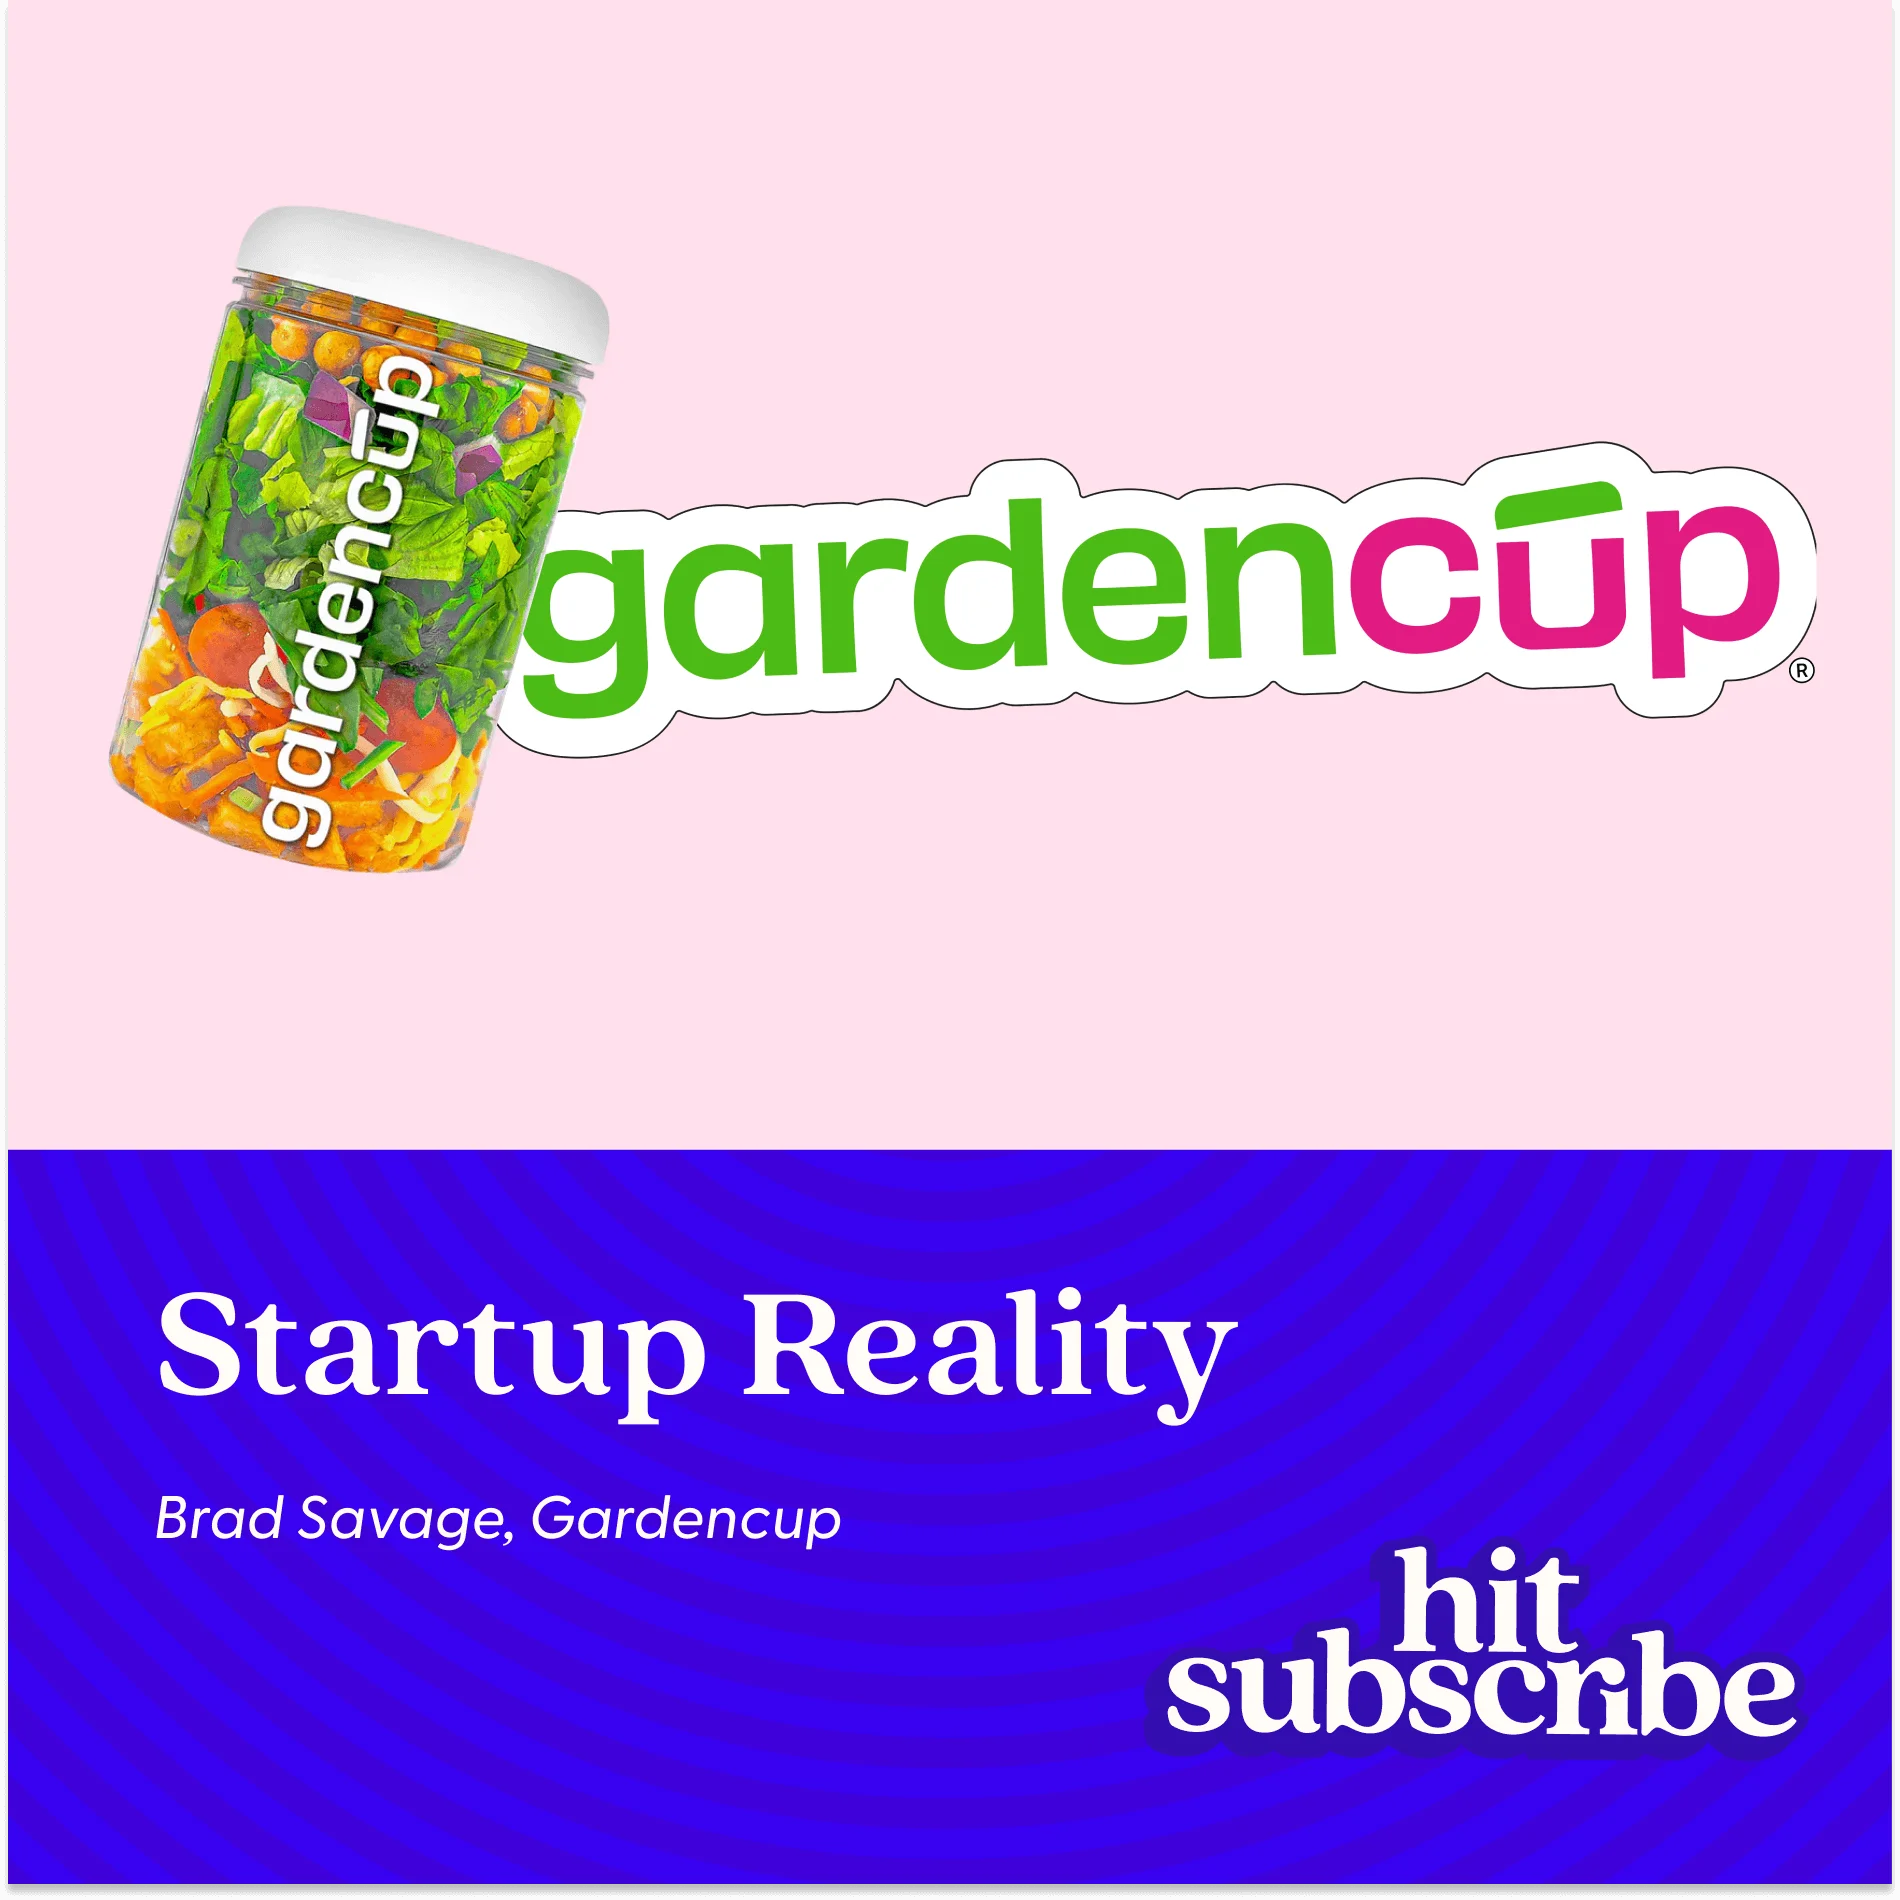 Hit Subscribe podcast episode cover featuring Brad Savage, Founder, Gardencup